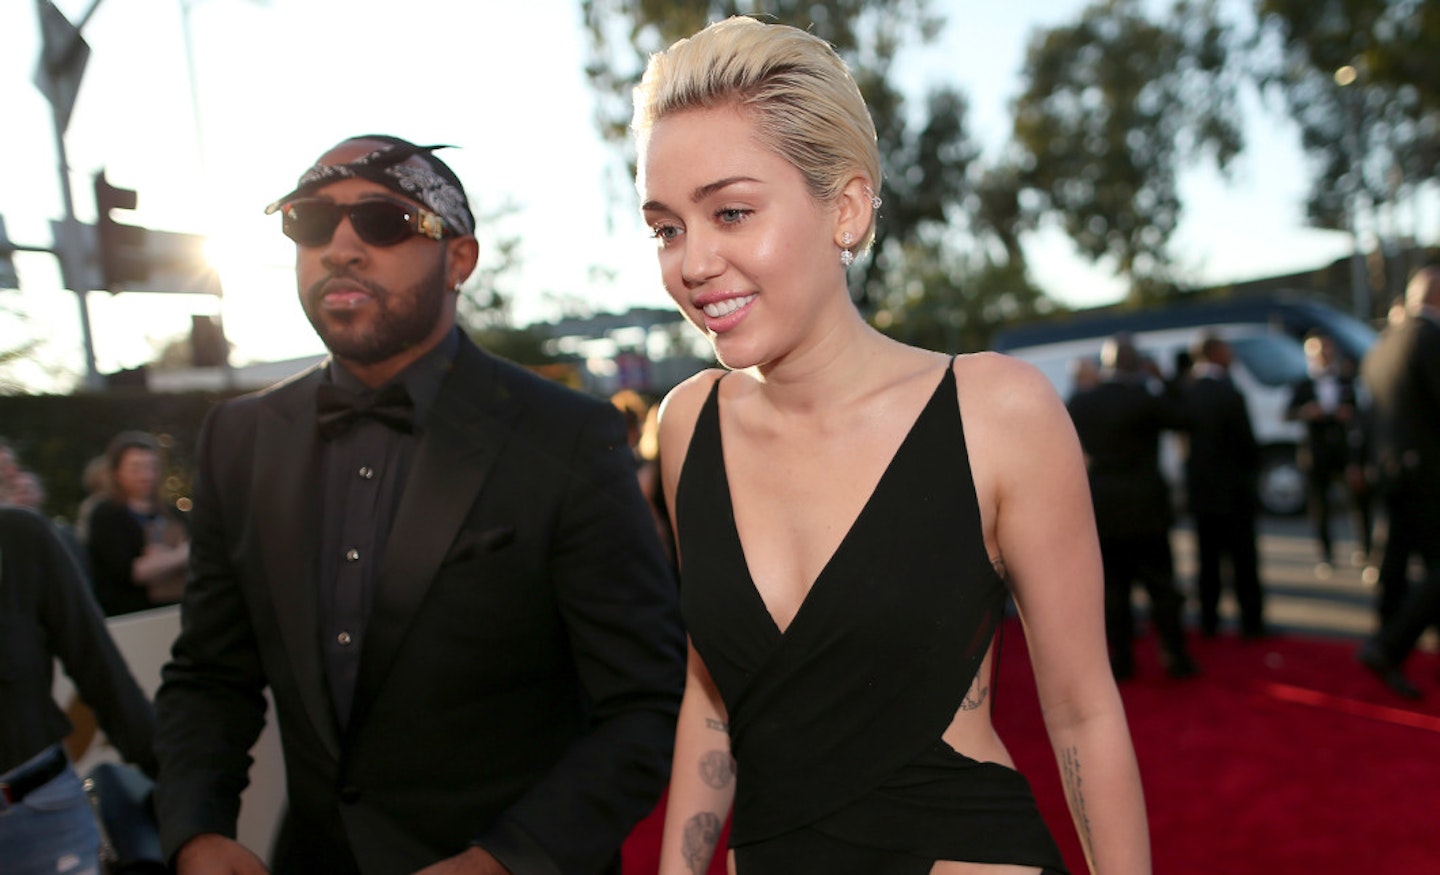 Miley Cyrus arriving at the Grammys (WireImage)